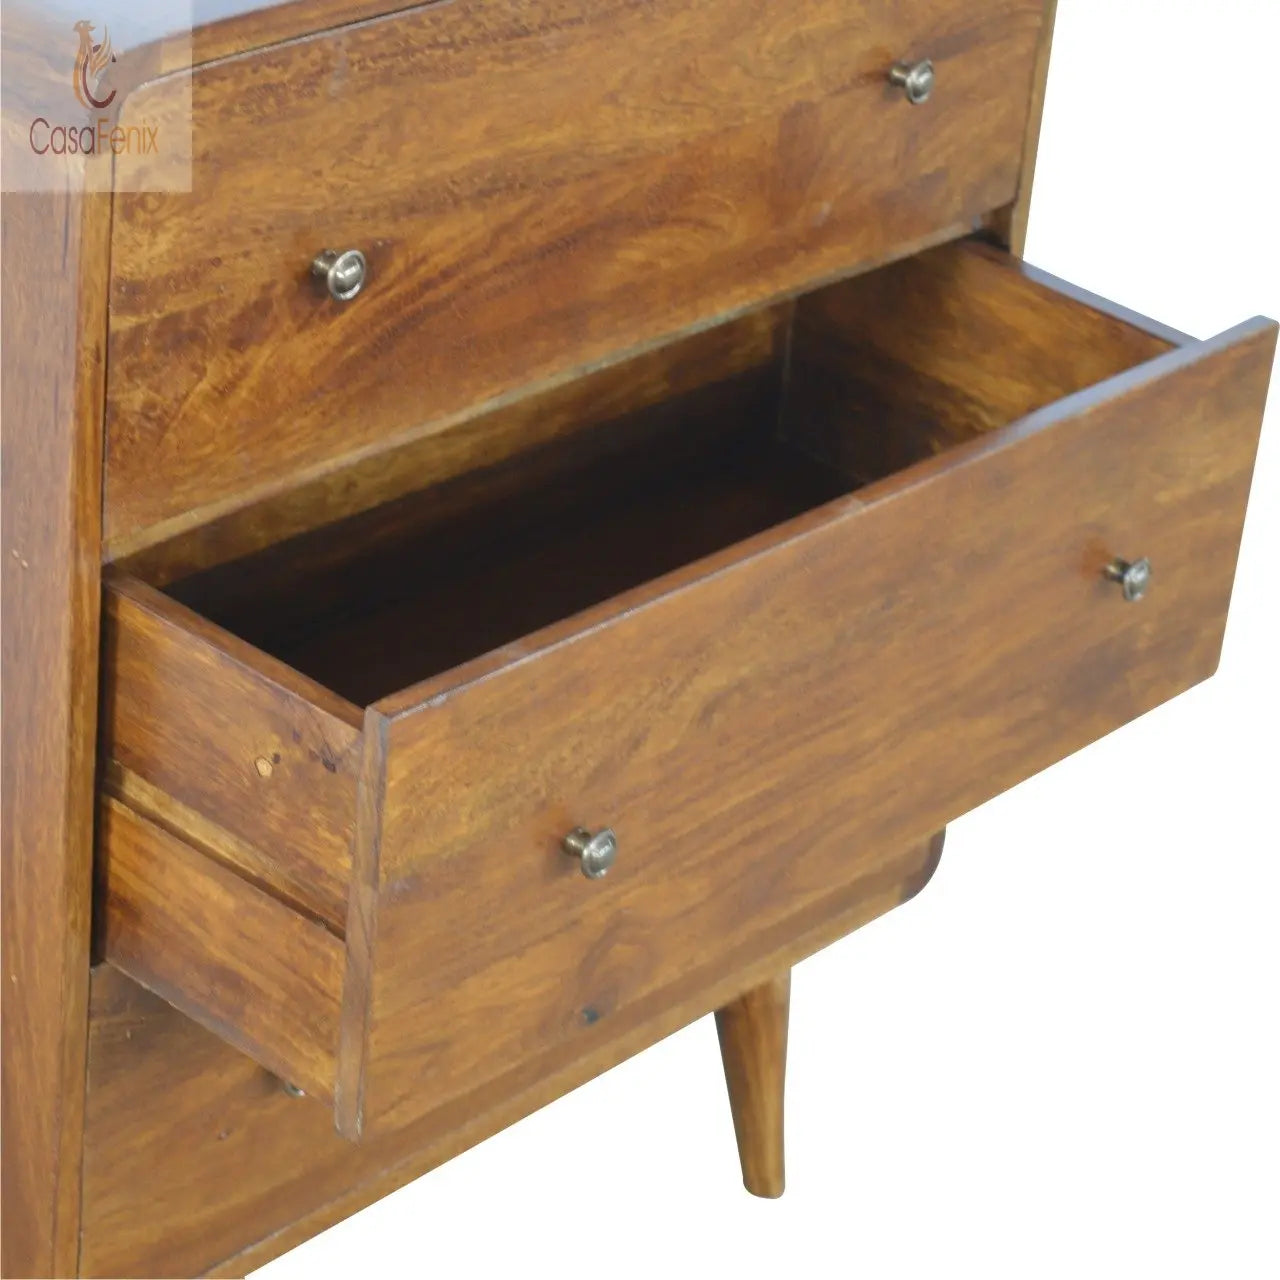 Curved Chestnut Chest of 3 Drawers - CasaFenix